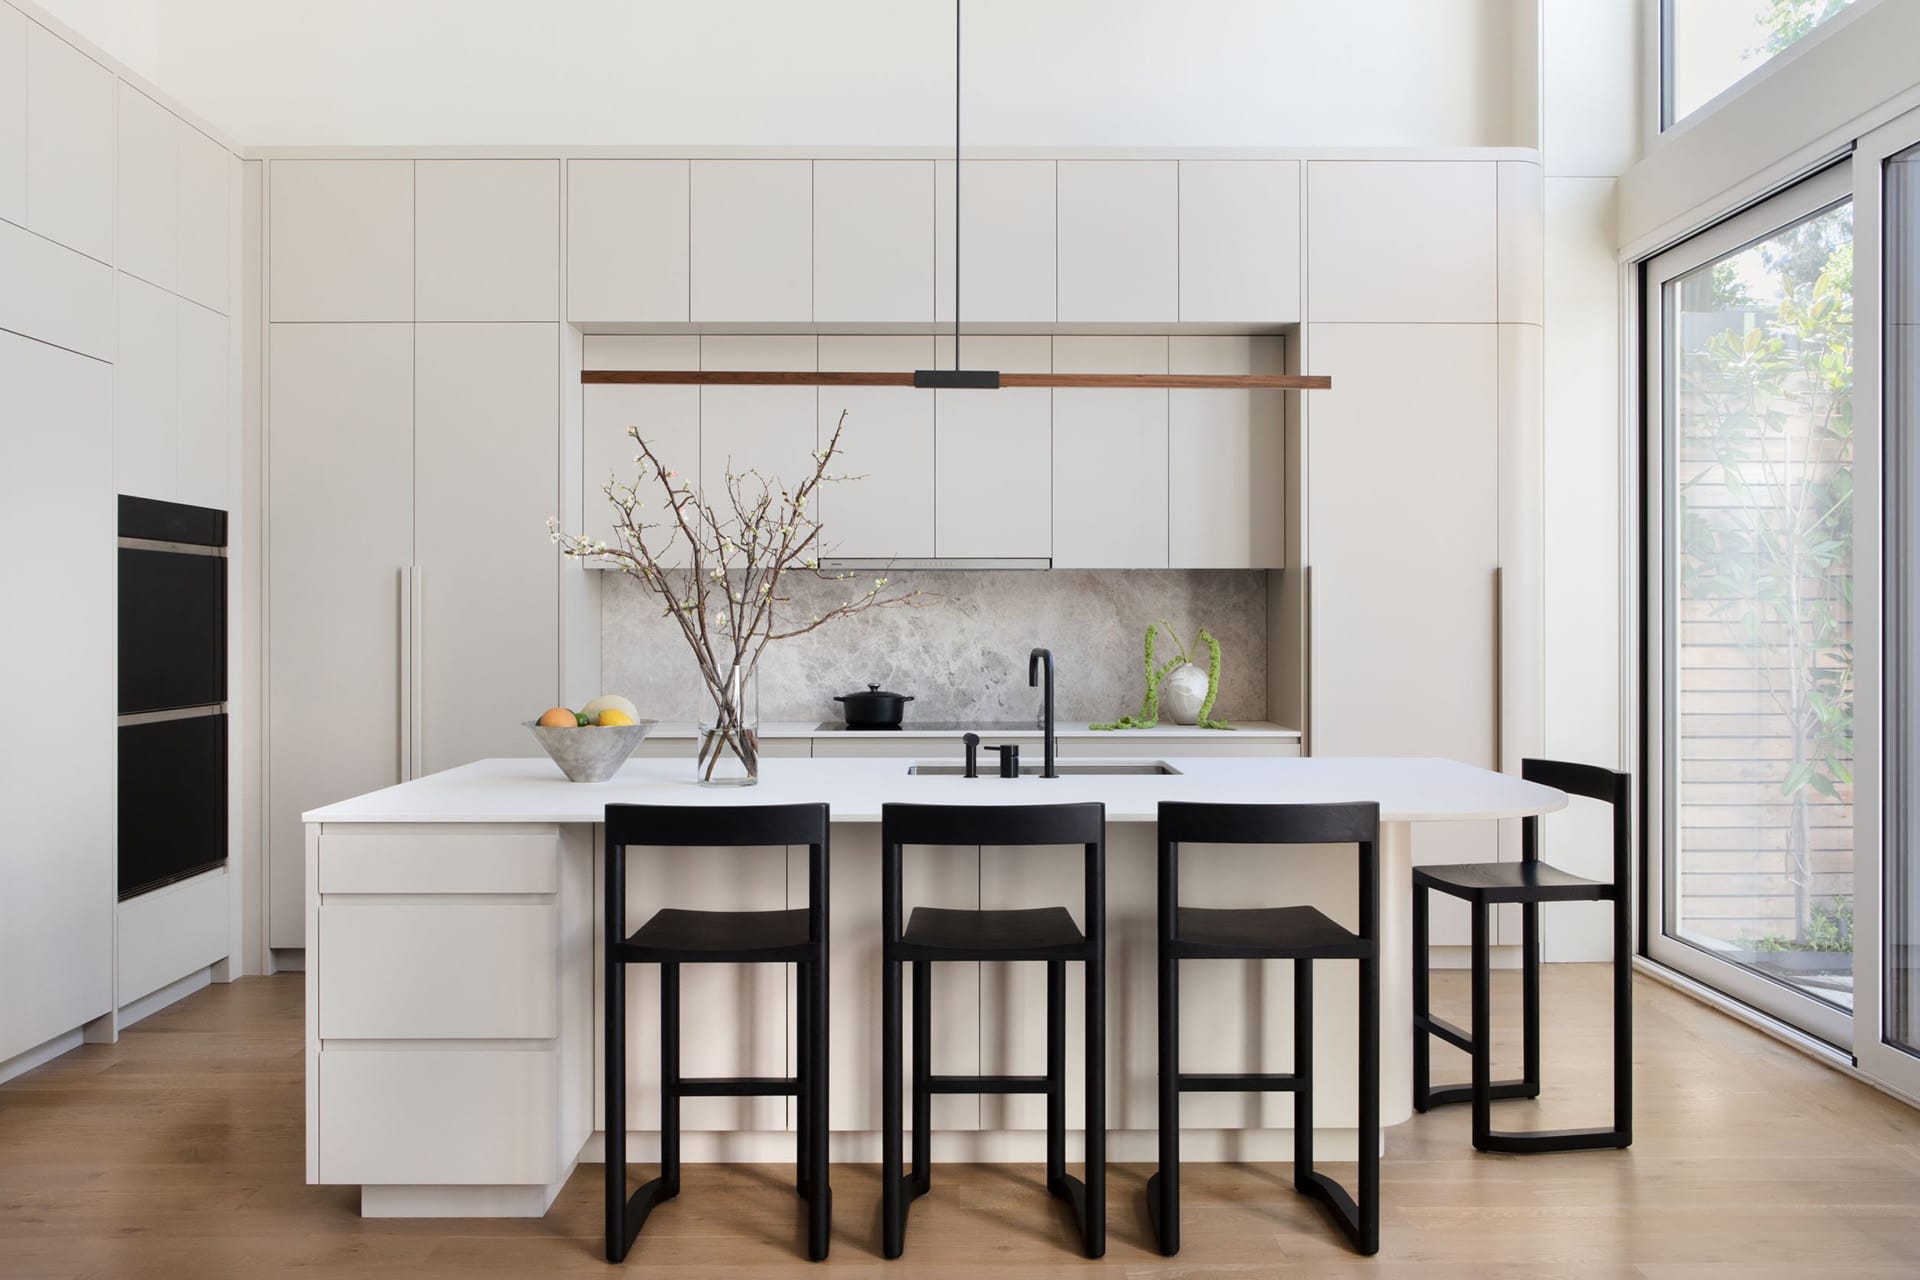 Modern kitchen with white millwork, a white countertop, marble backsplash, and four black barstools.